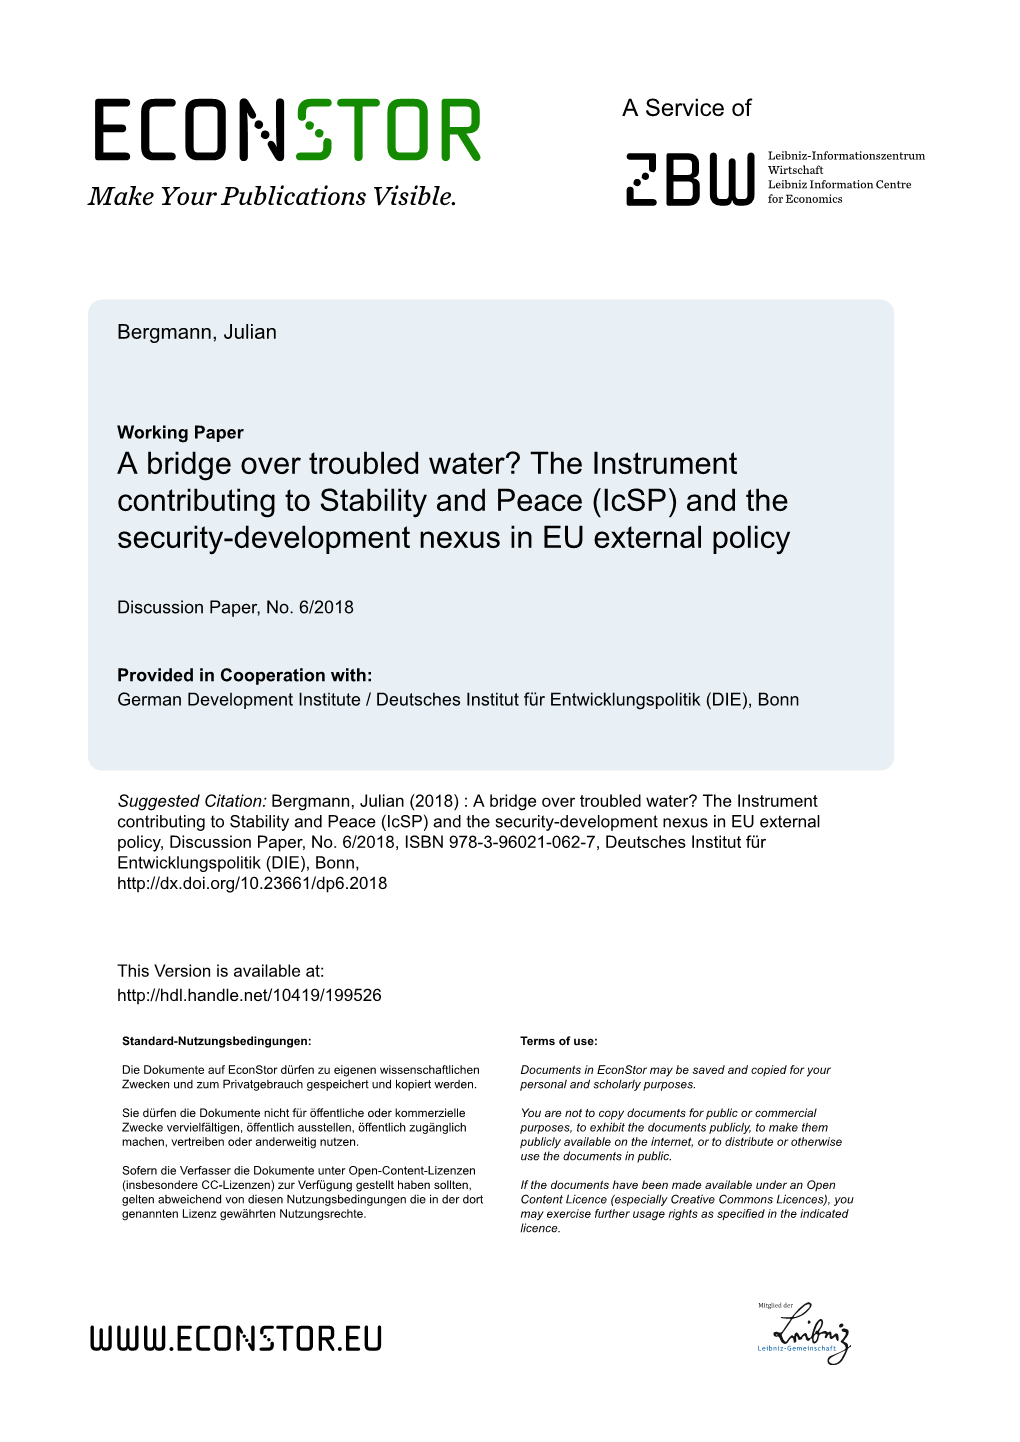 Icsp) and the Security-Development Nexus in EU External Policy